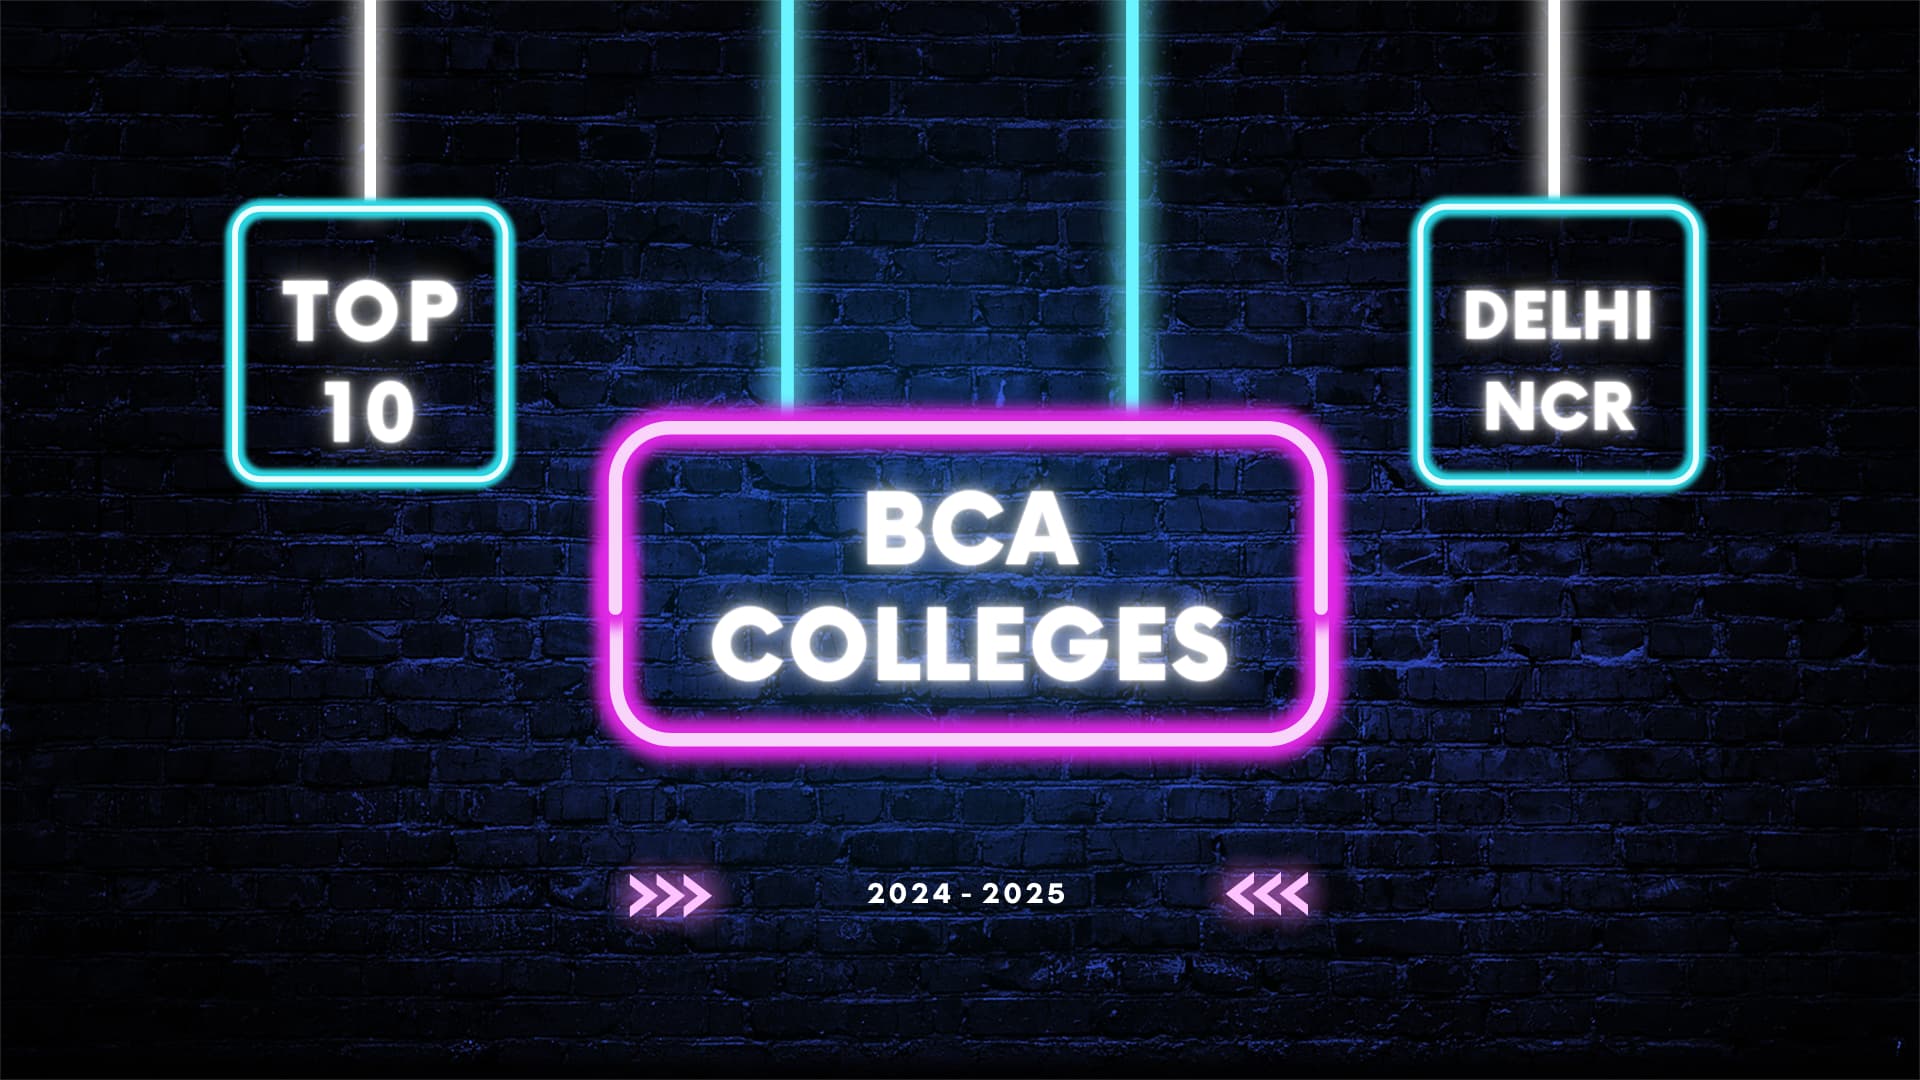 Discover 10 Top BCA College in Delhi NCR for 2024